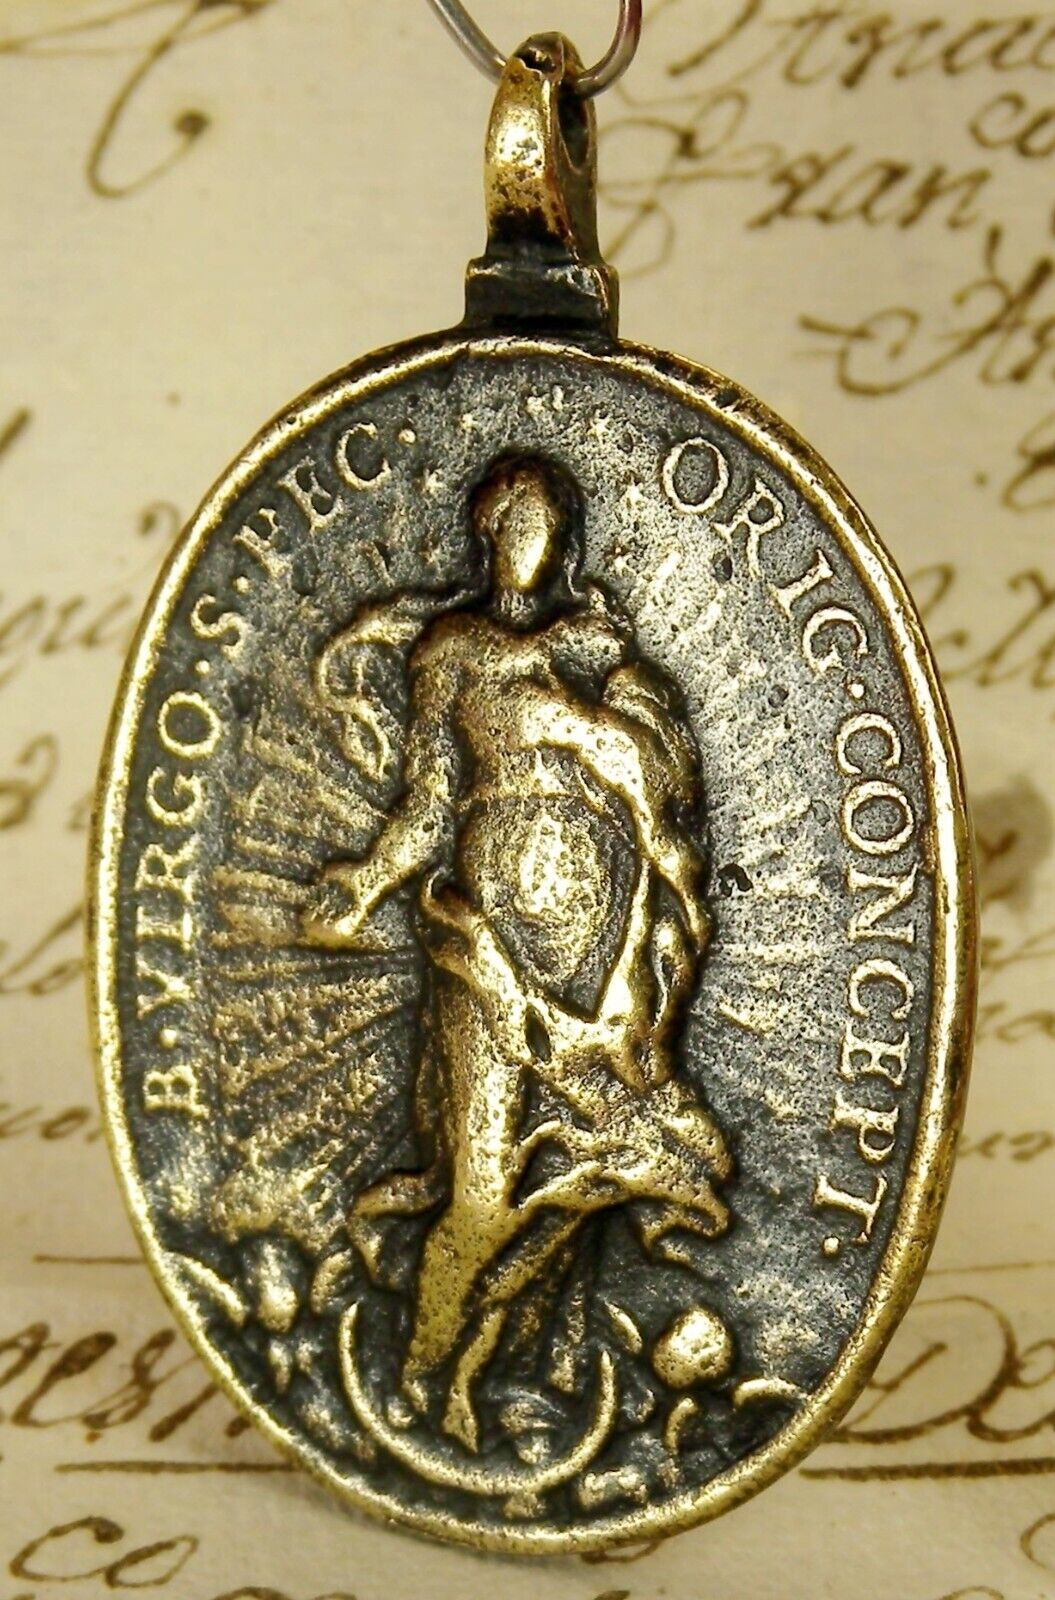 CATHOLIC IMMACULATE CONCEPTION & SAINT MICHAEL SPANISH COLONIAL SHIPWRECK MEDAL